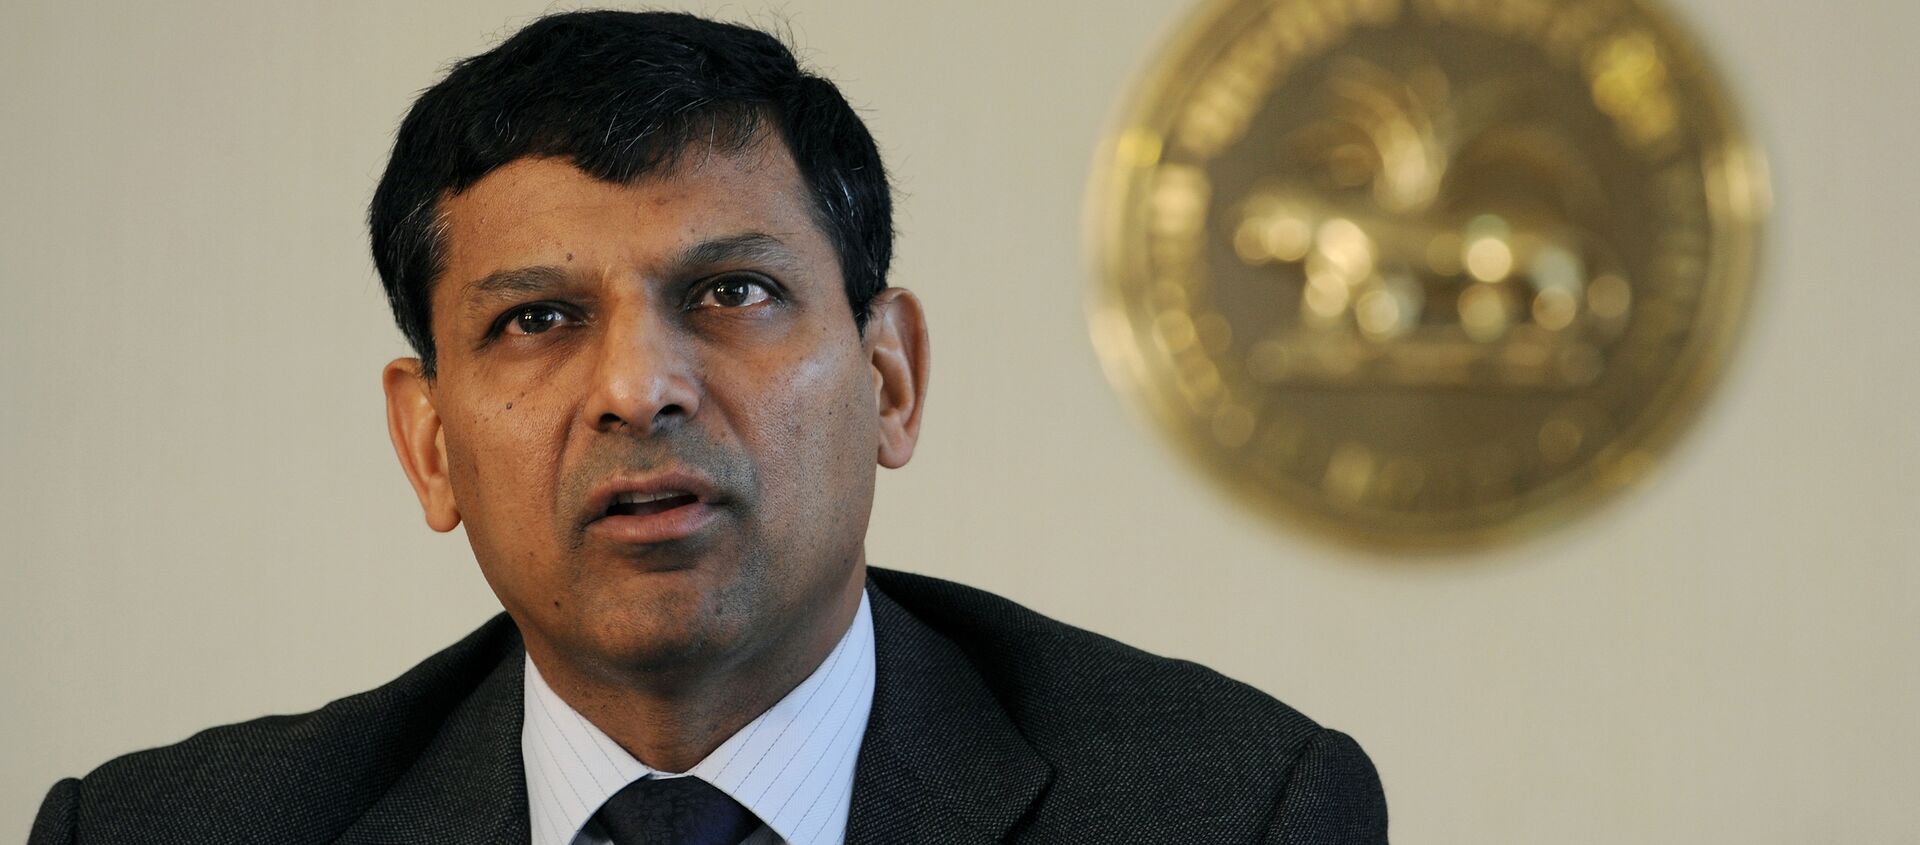 Reserve Bank of India (RBI) governor Raghuram Rajan announces the first bi-monthly Monetary Policy Statement 2014-15 at the RBI headquarters in Mumbai on April 1, 2014 - Sputnik International, 1920, 30.04.2020